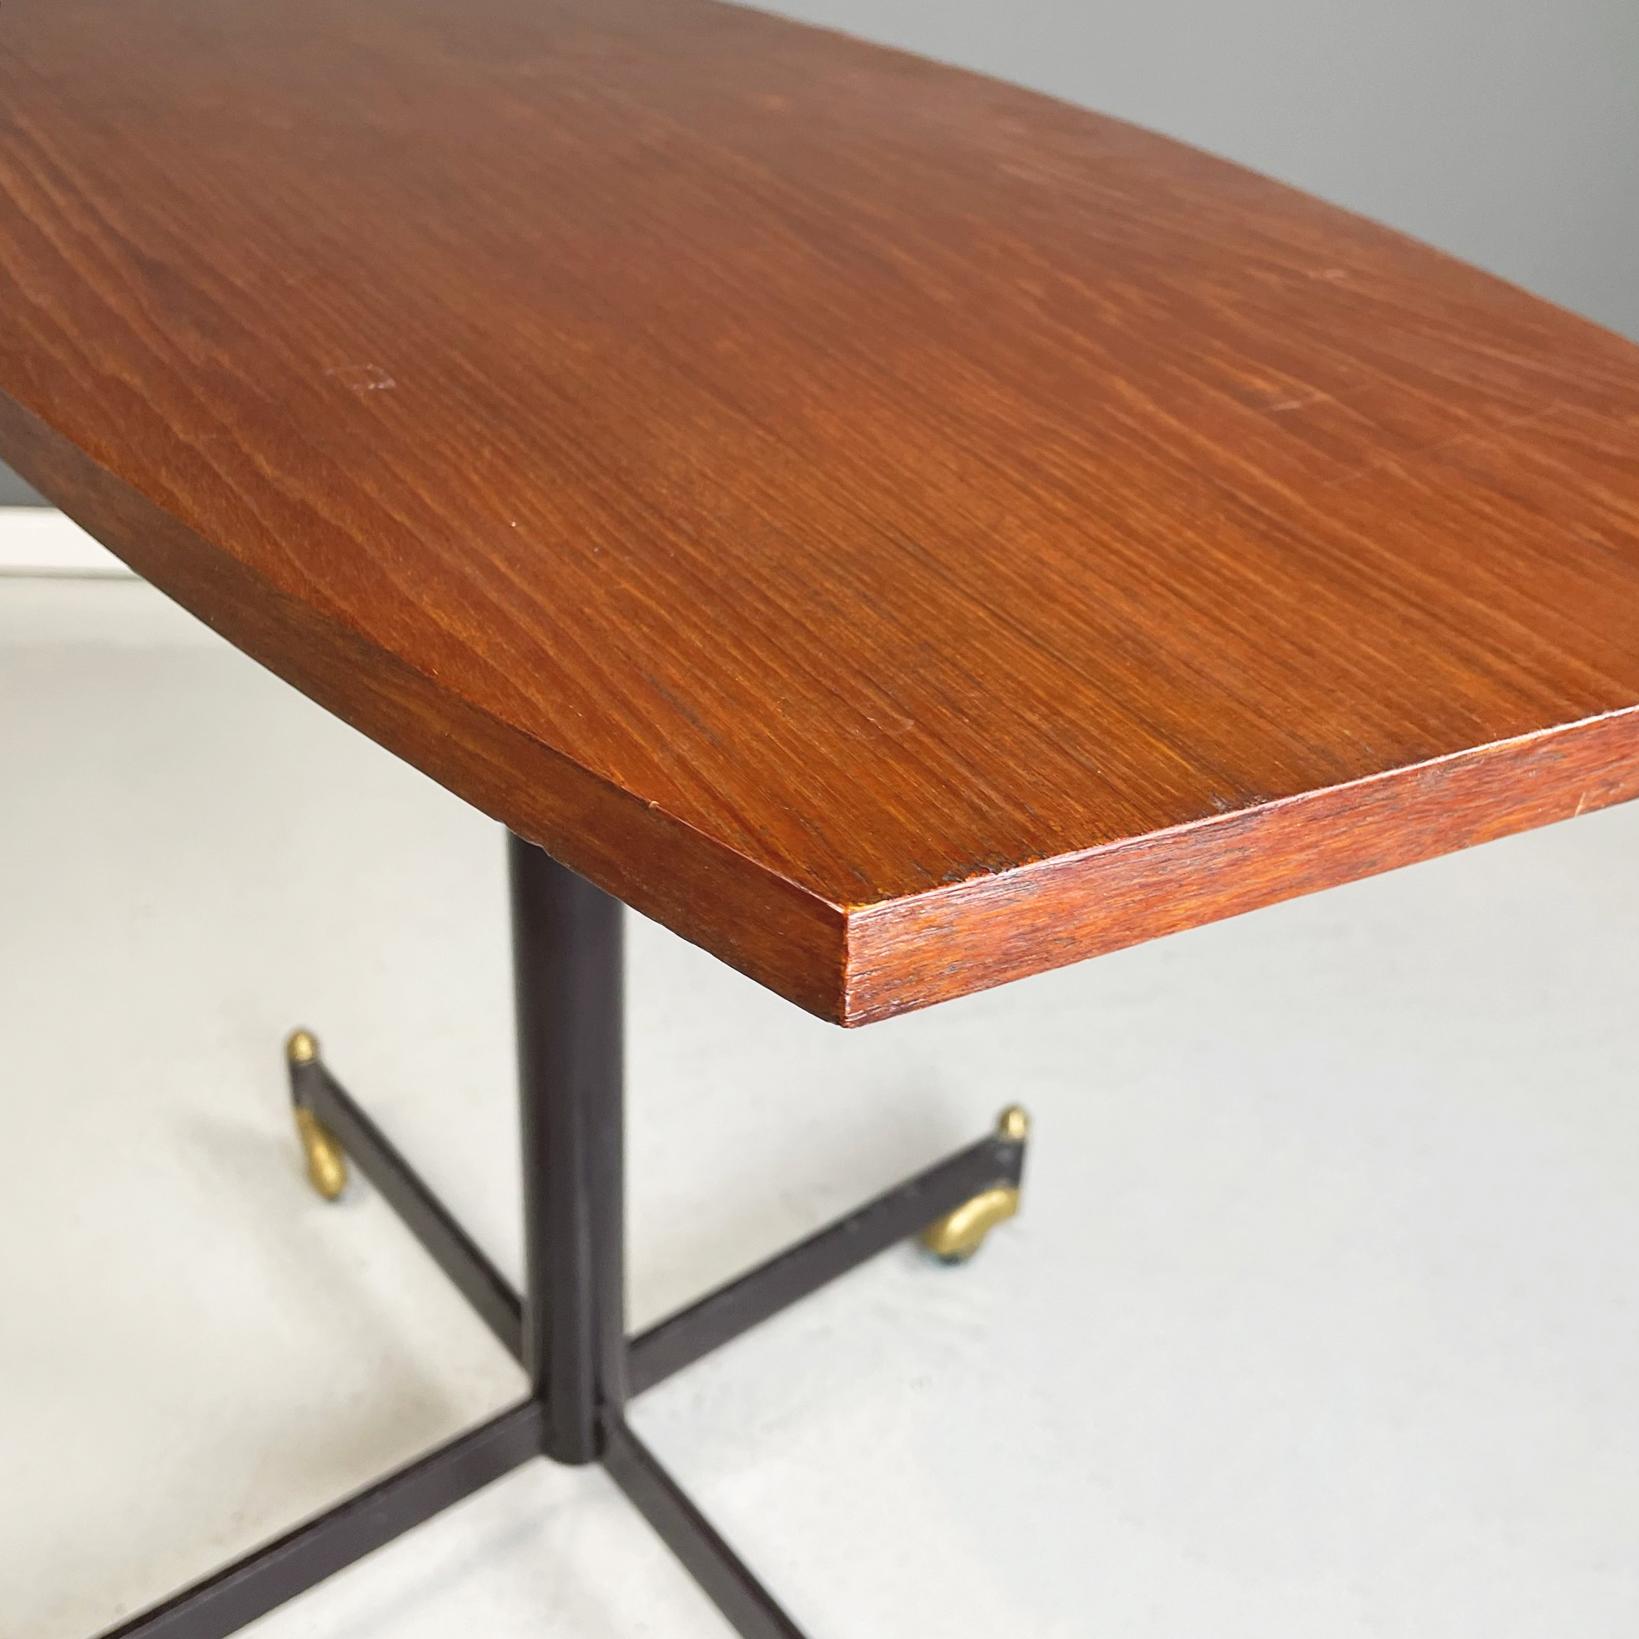 Italian Midcentury Table with Adjustable Wooden Top Withe Metal and Brass, 1950s For Sale 2